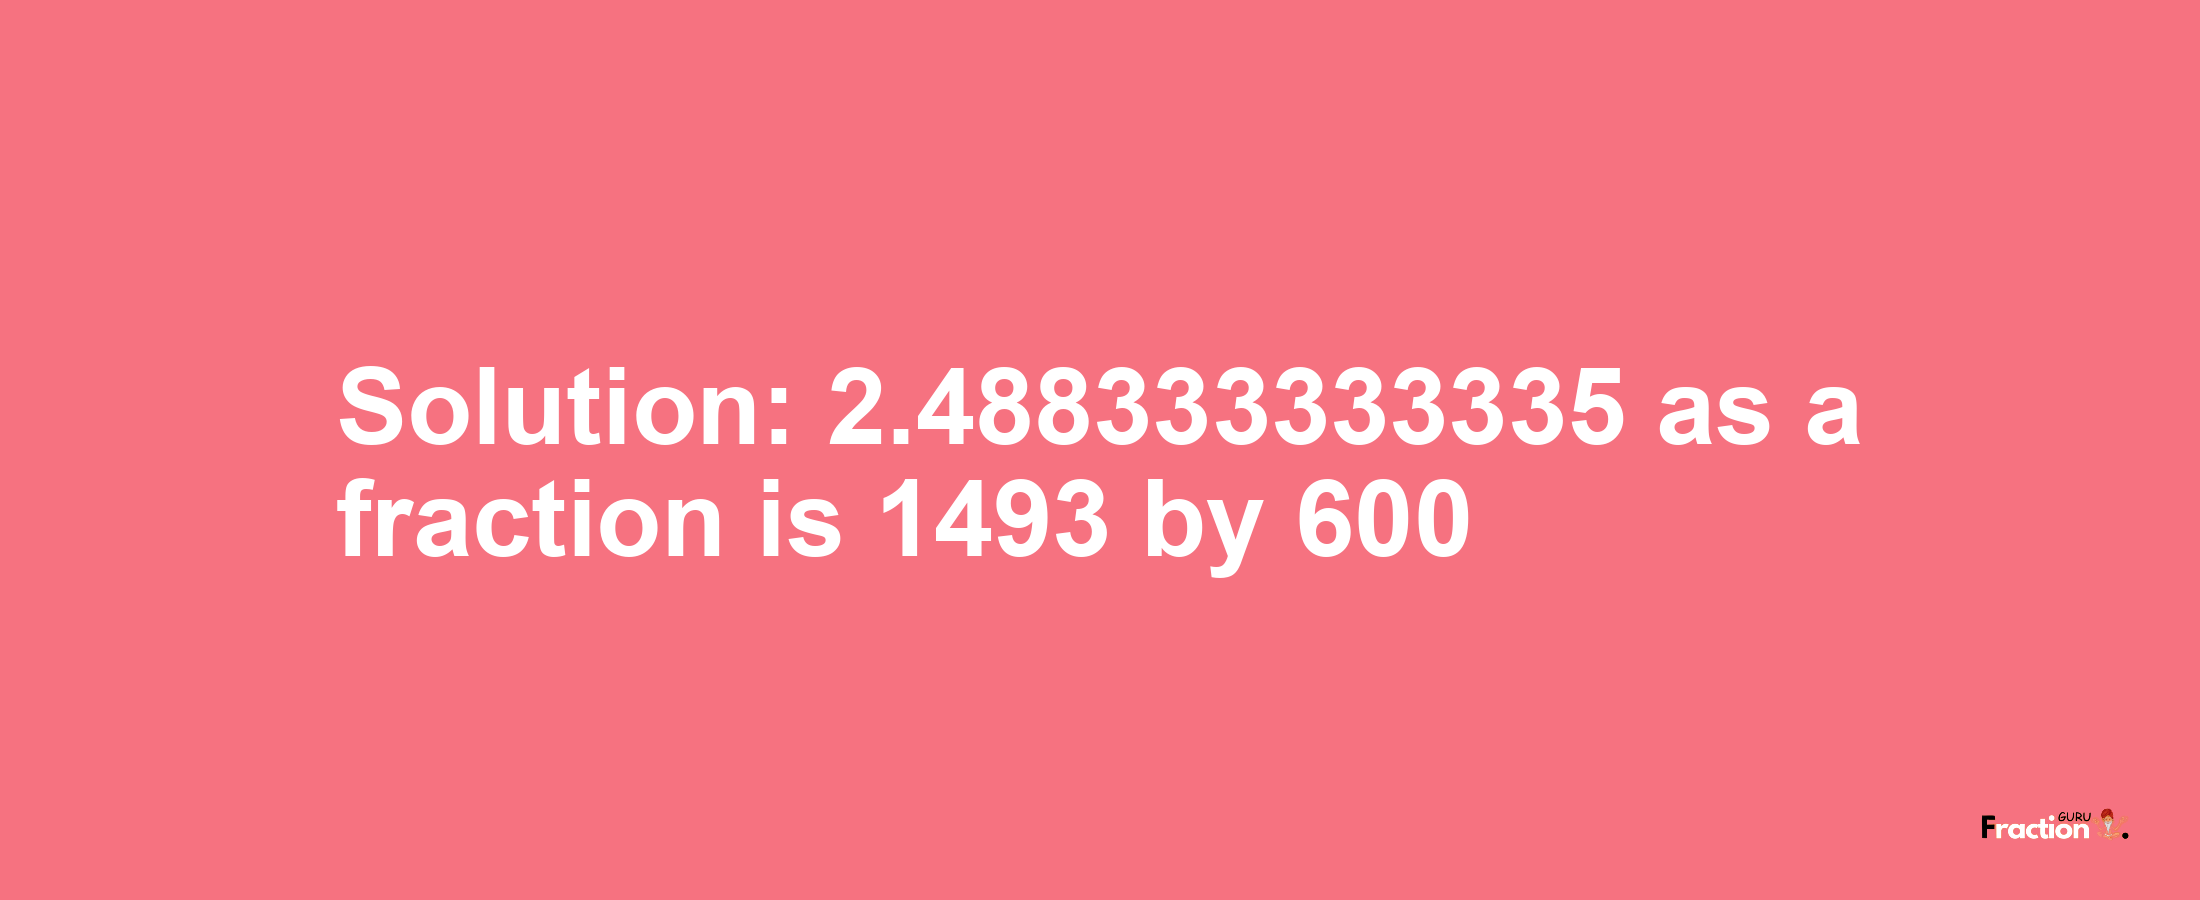 Solution:2.488333333335 as a fraction is 1493/600